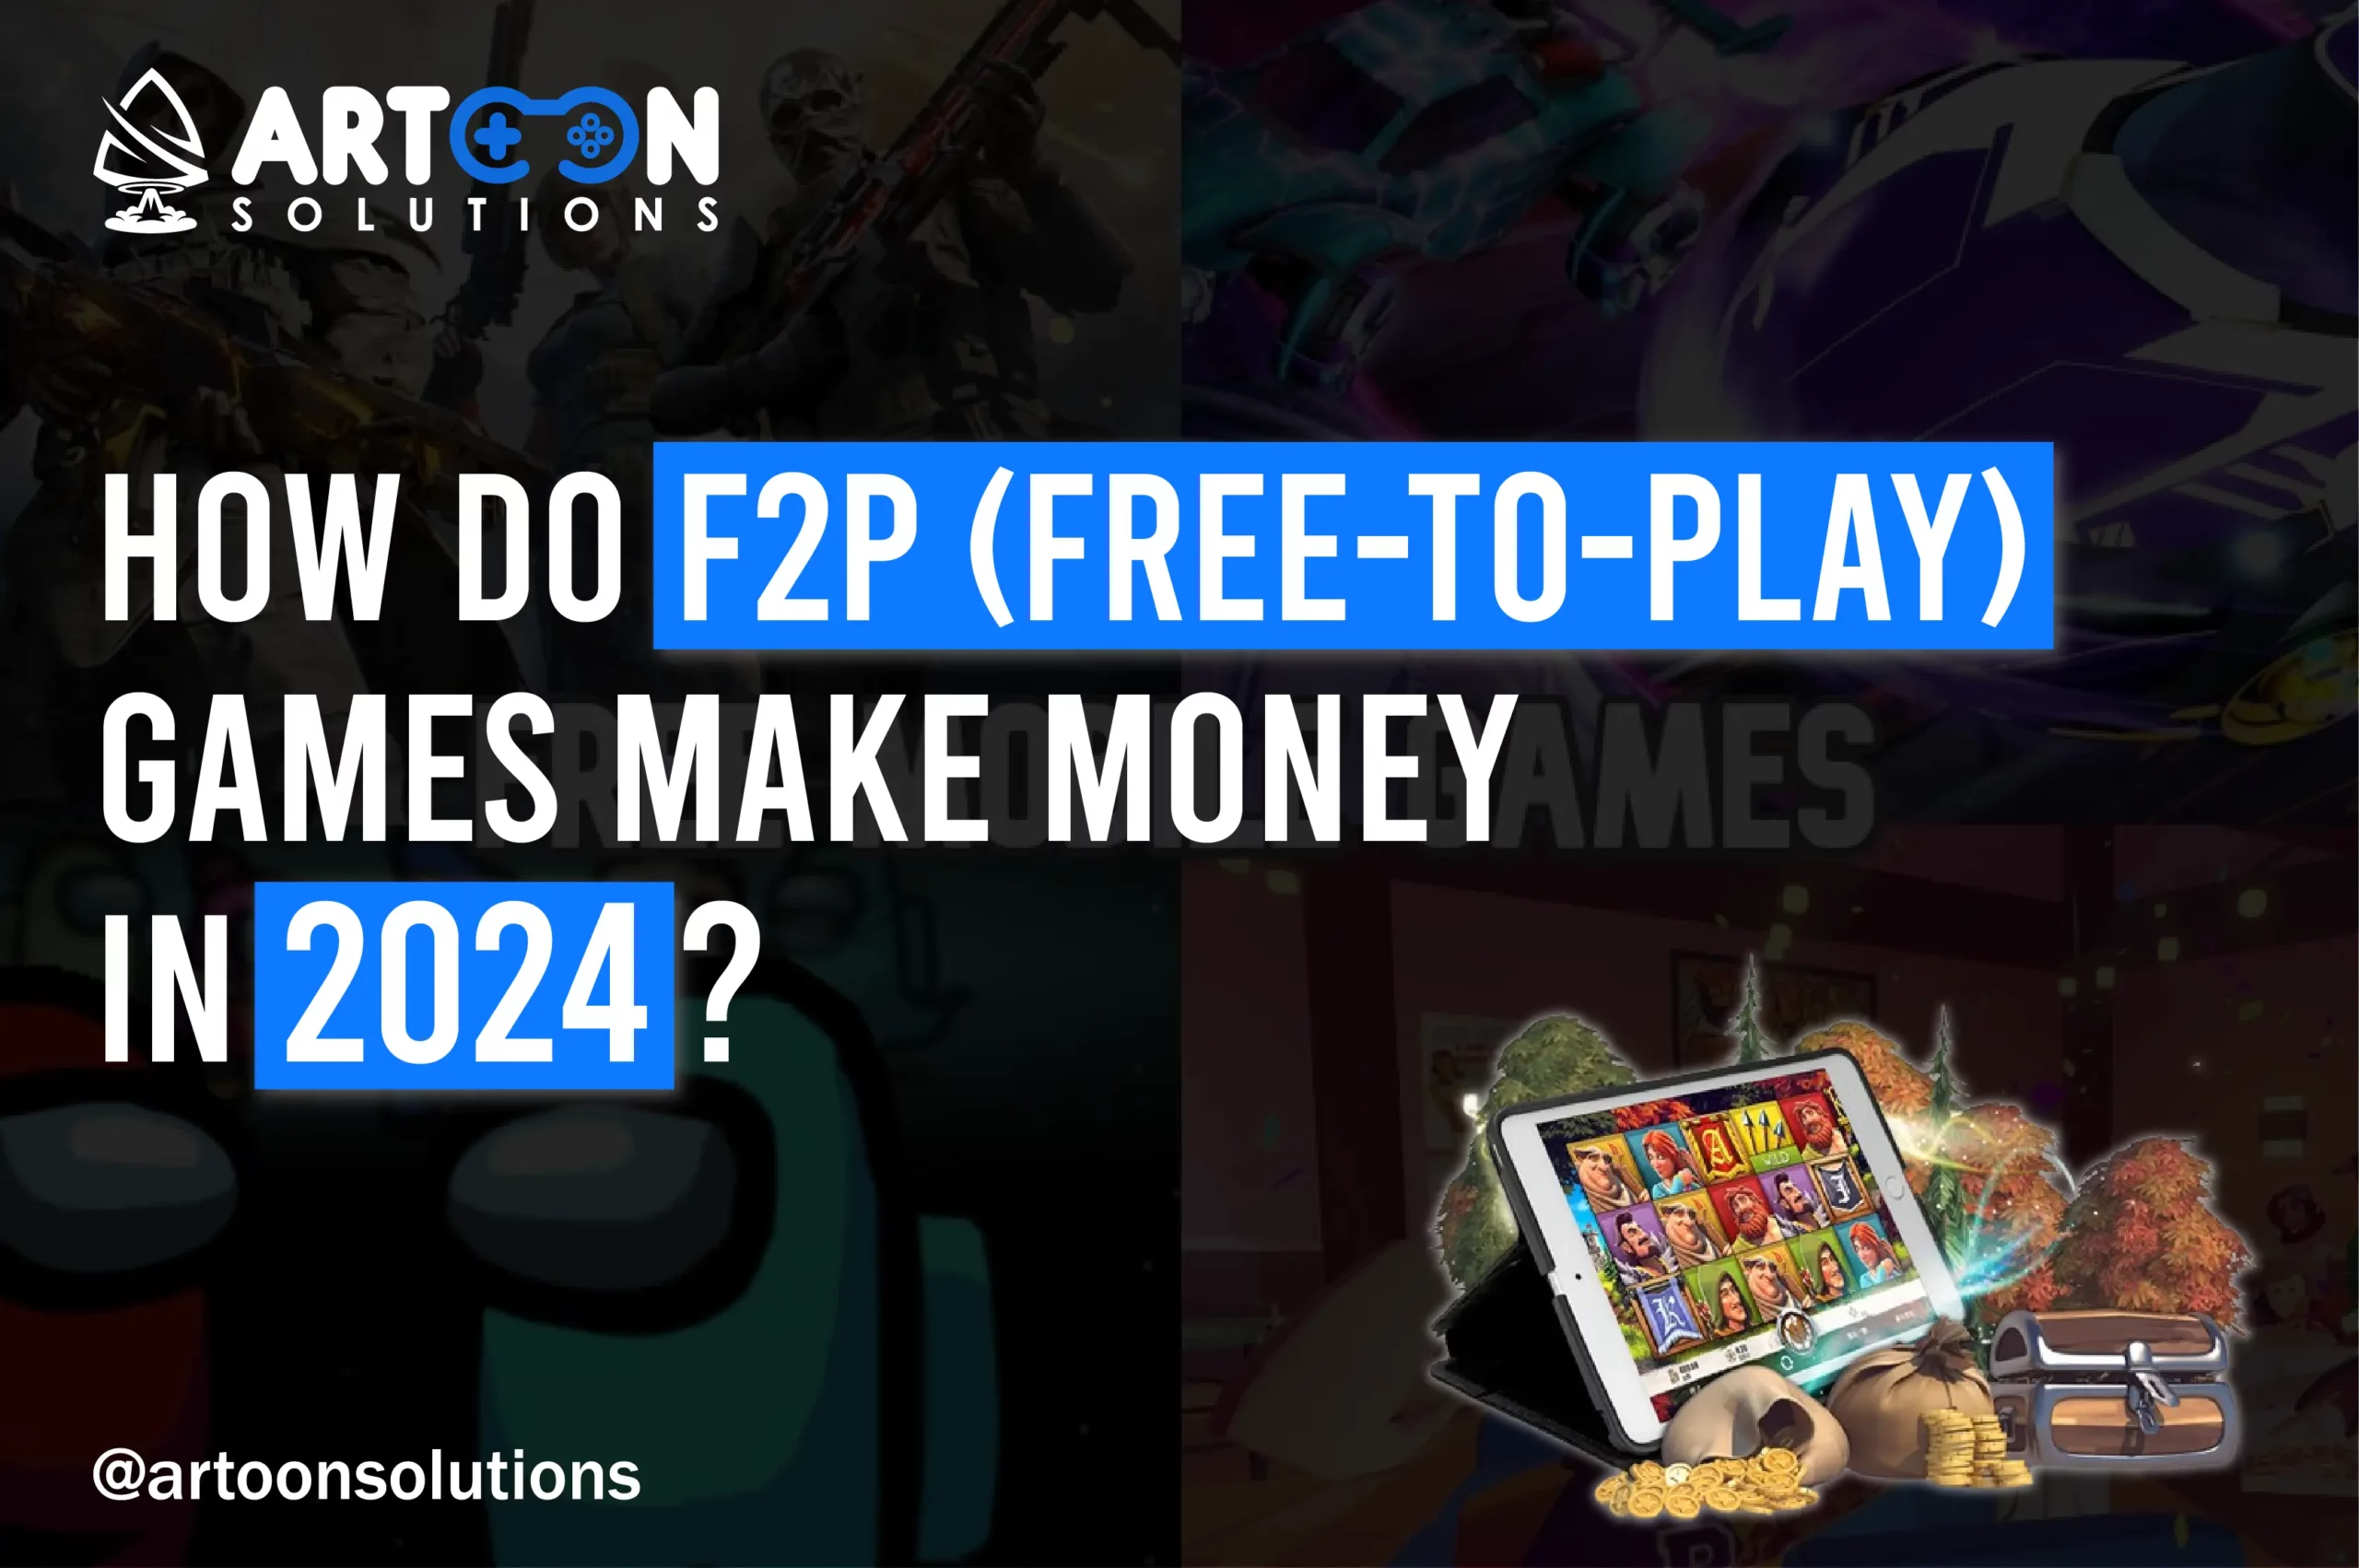 Ways to Make Money by Playing Games in 2023